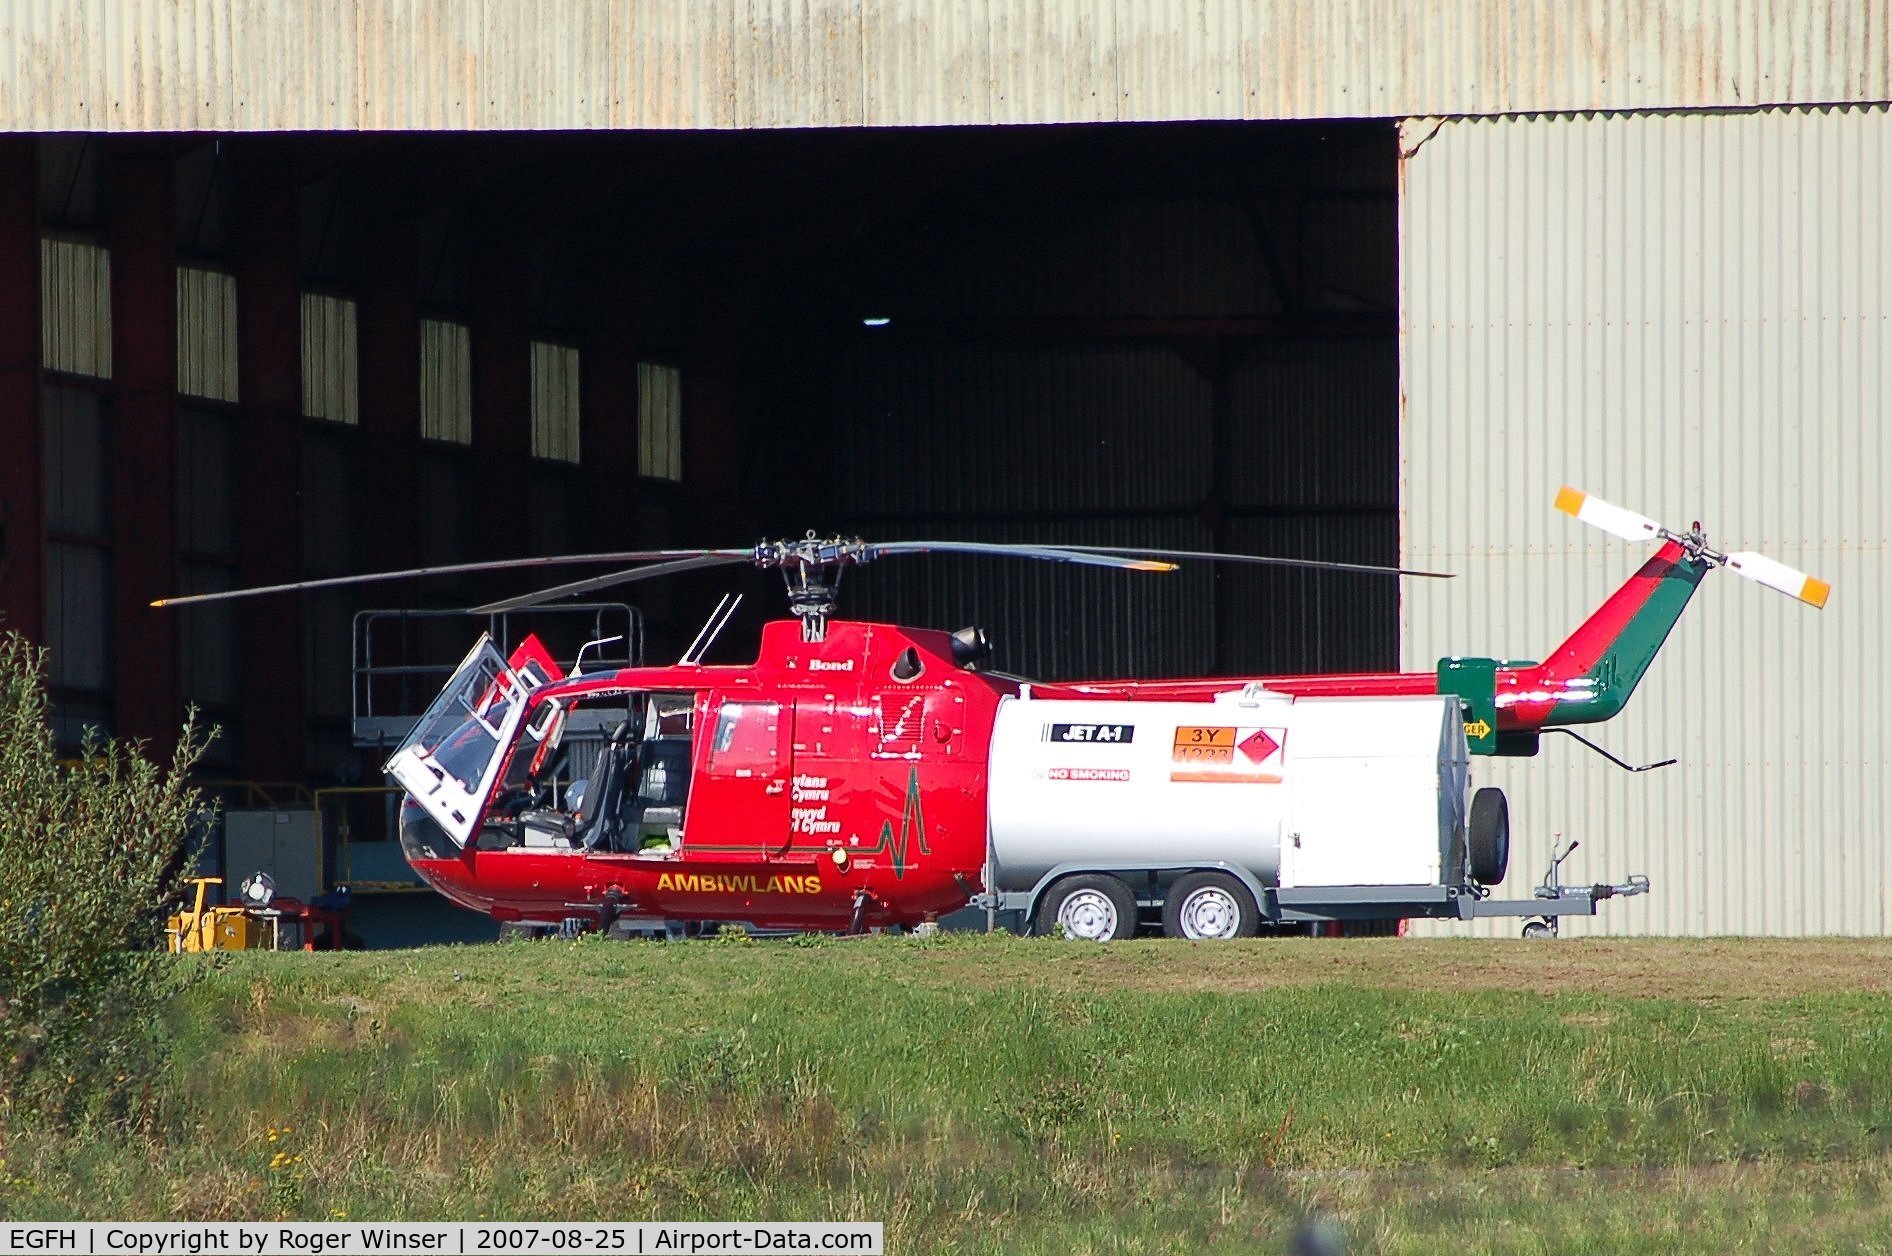 Swansea Airport, Swansea, Wales United Kingdom (EGFH) - Wales Air Ambulance helicopter at it's Swansea Airport Base 